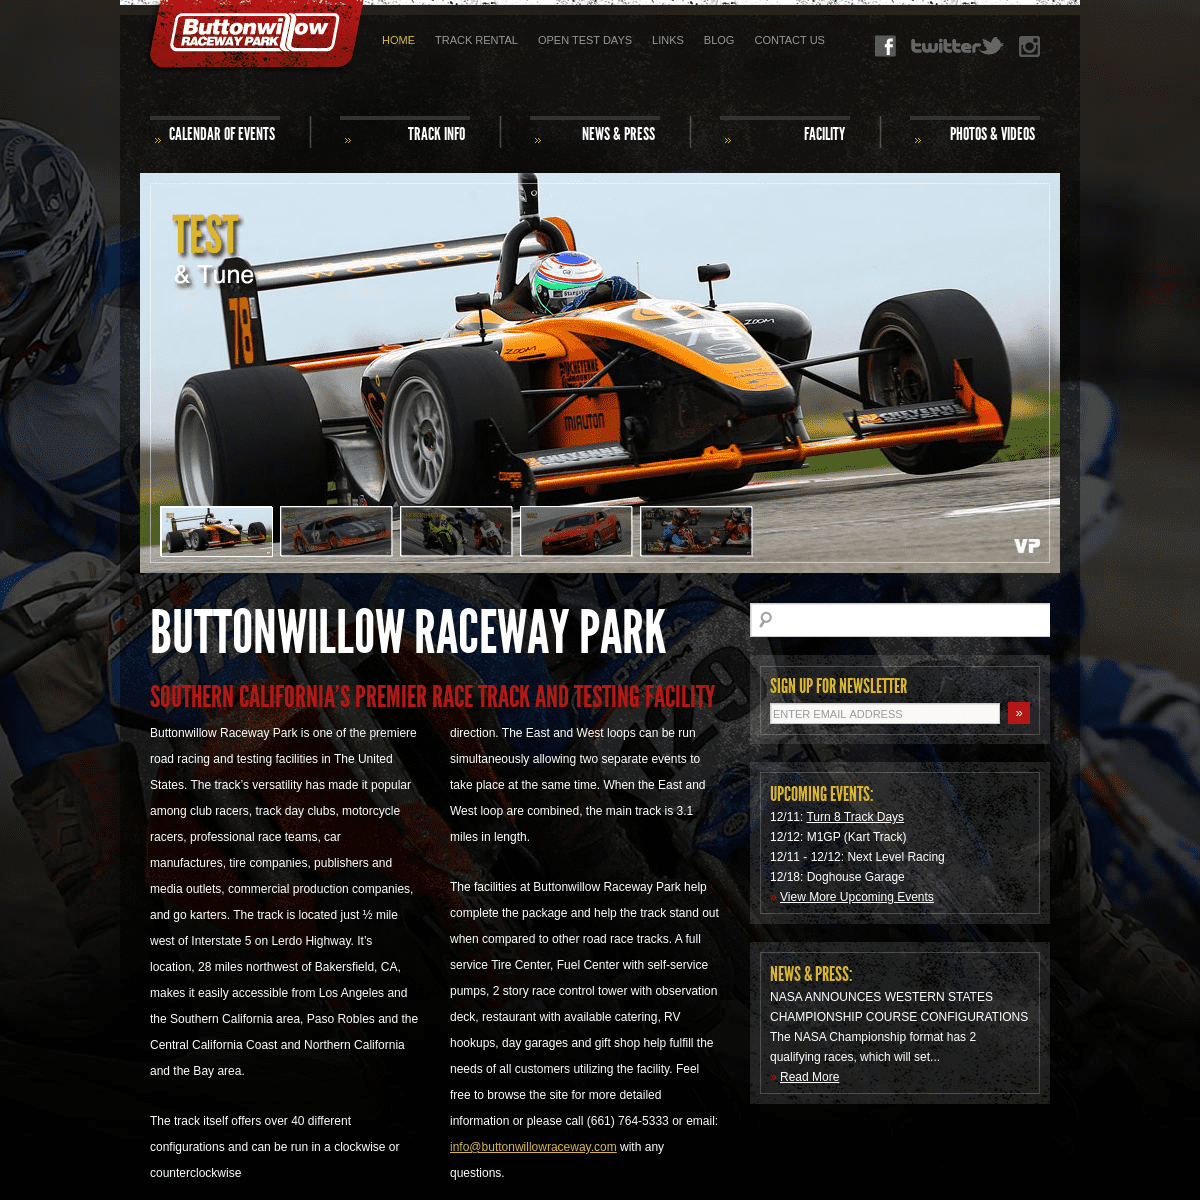 A complete backup of buttonwillowraceway.com